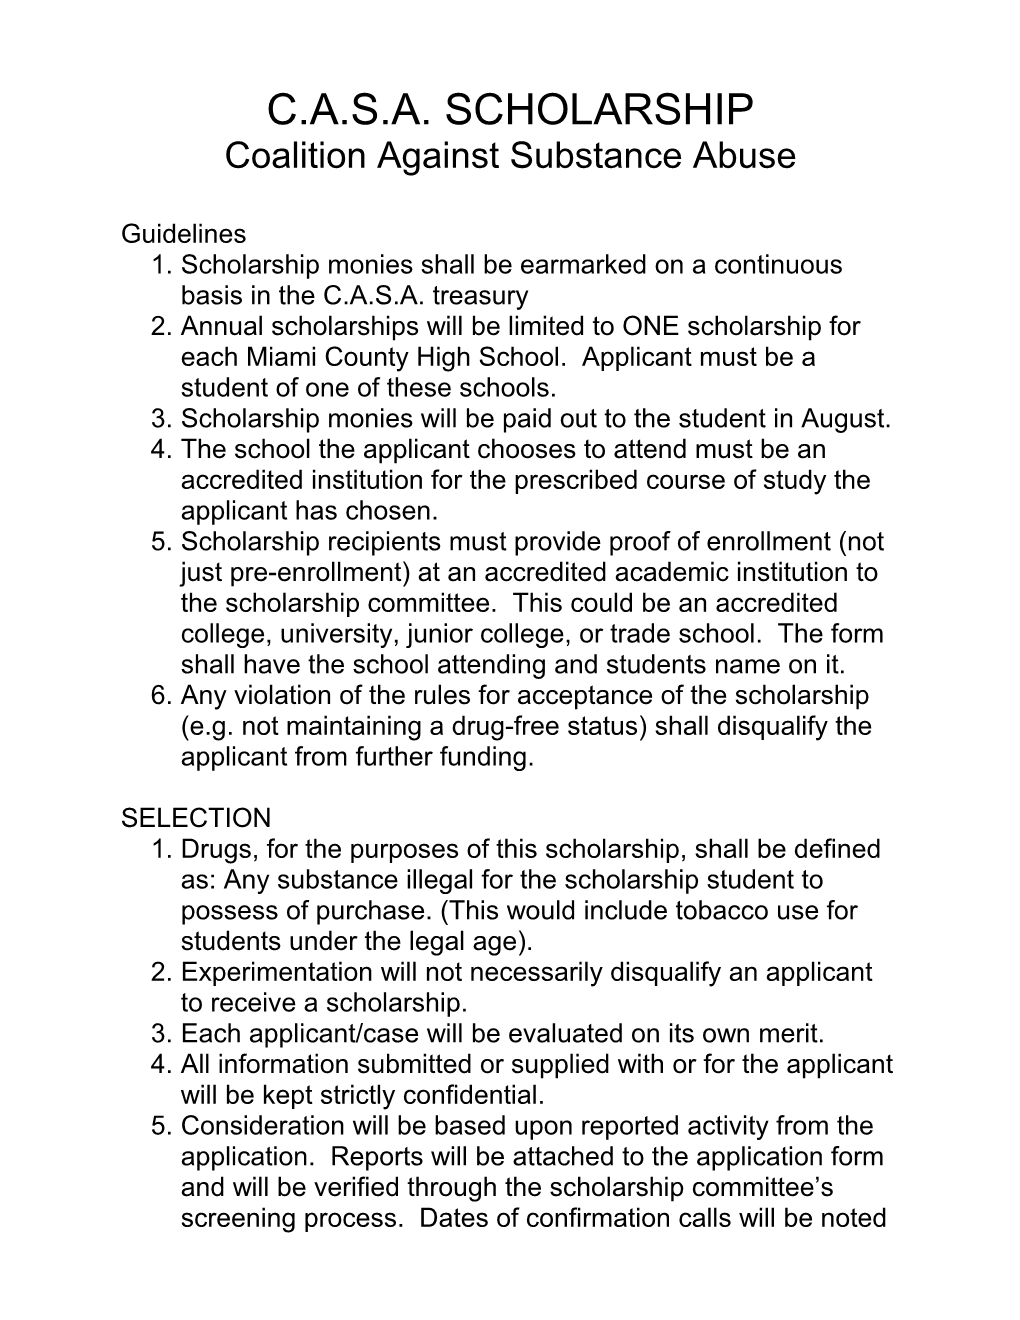 Coalition Against Substance Abuse